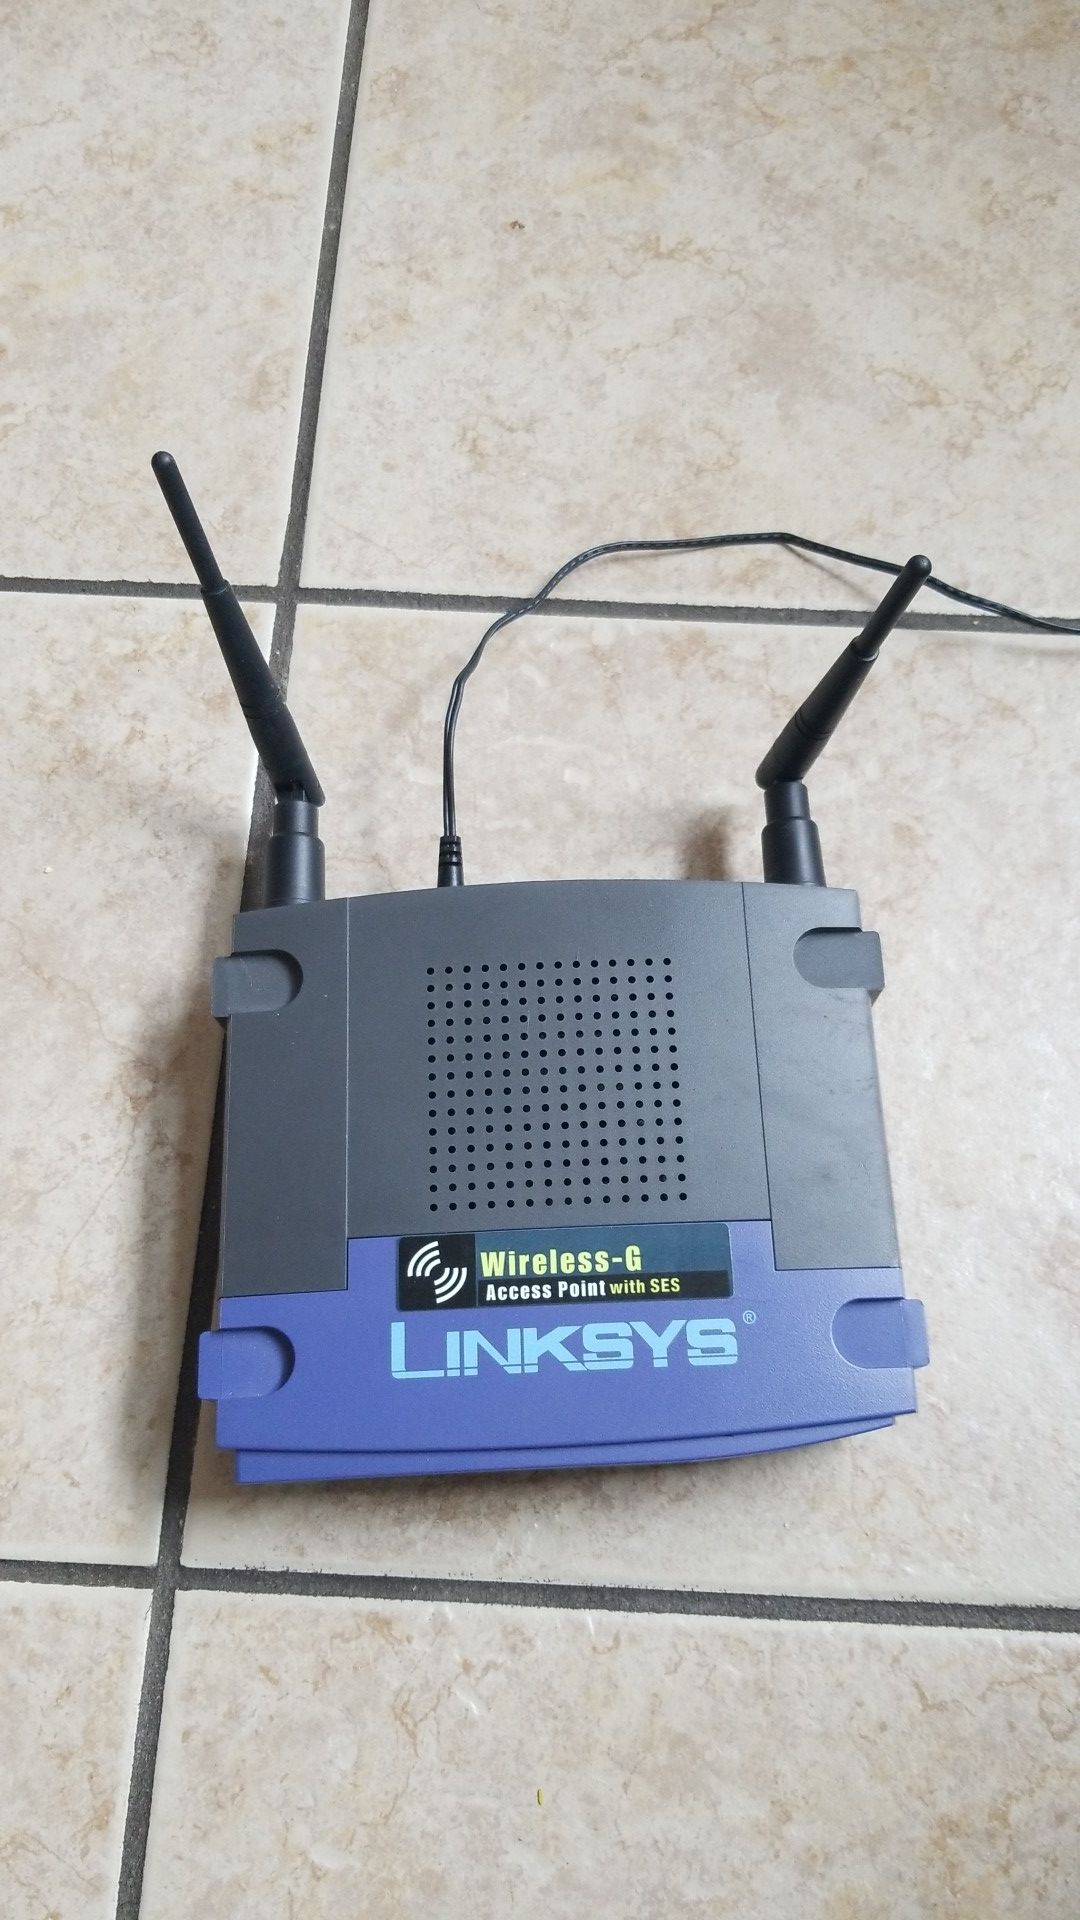 LINKSYS WAP54G 802.11b/g Wireless-G Access Point up to 54Mbps/ DD-WRT Open Source Support